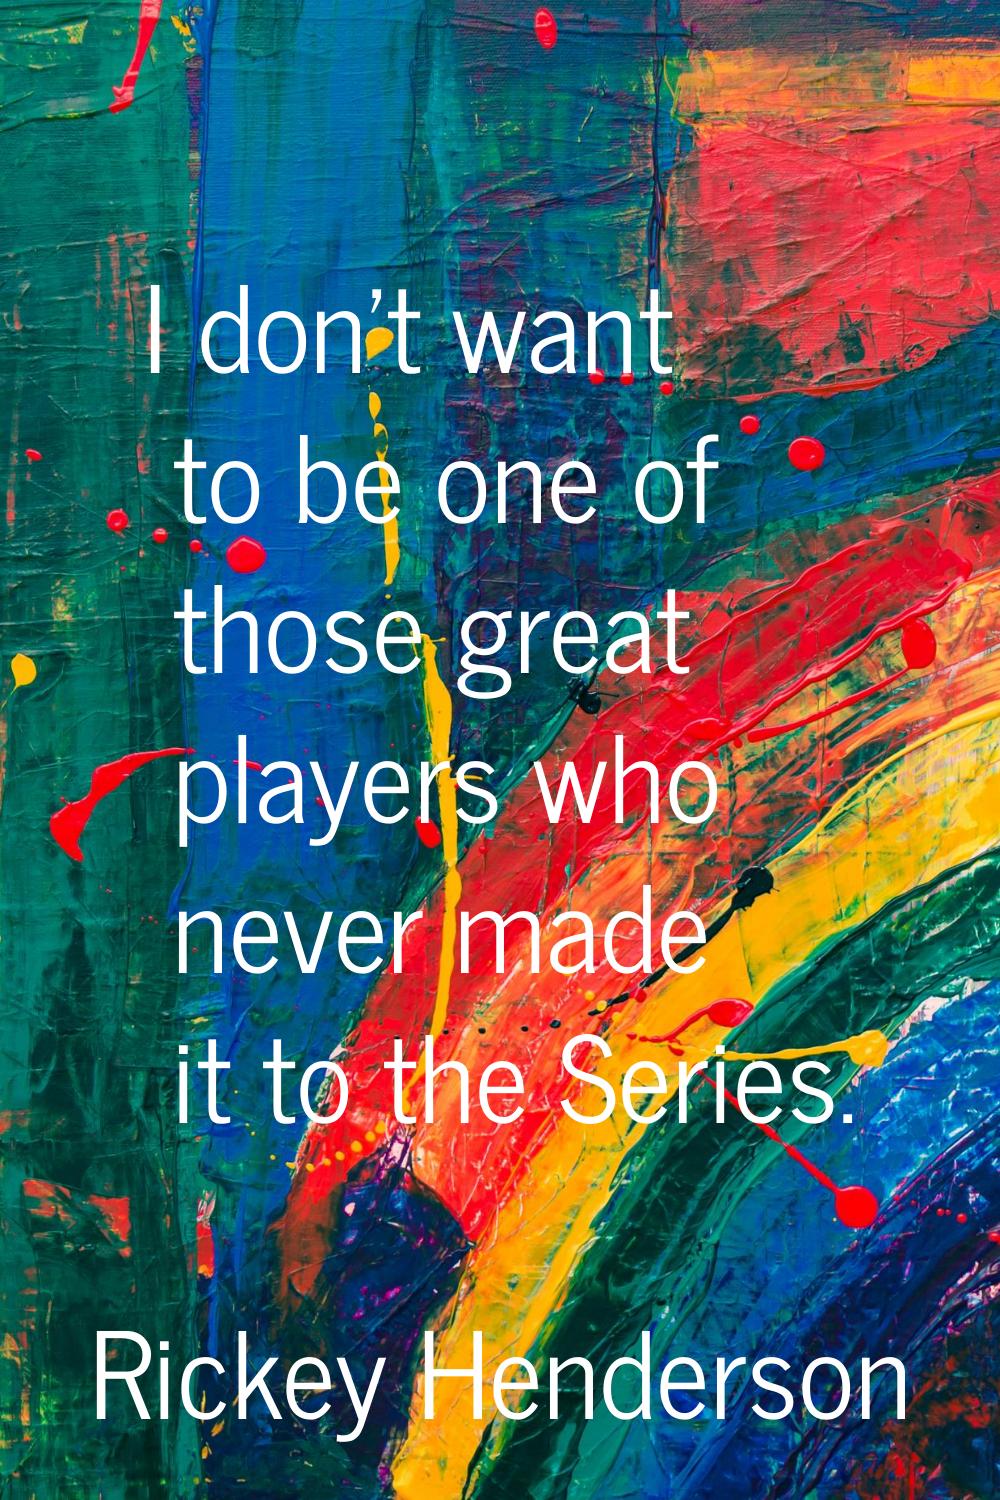 I don't want to be one of those great players who never made it to the Series.